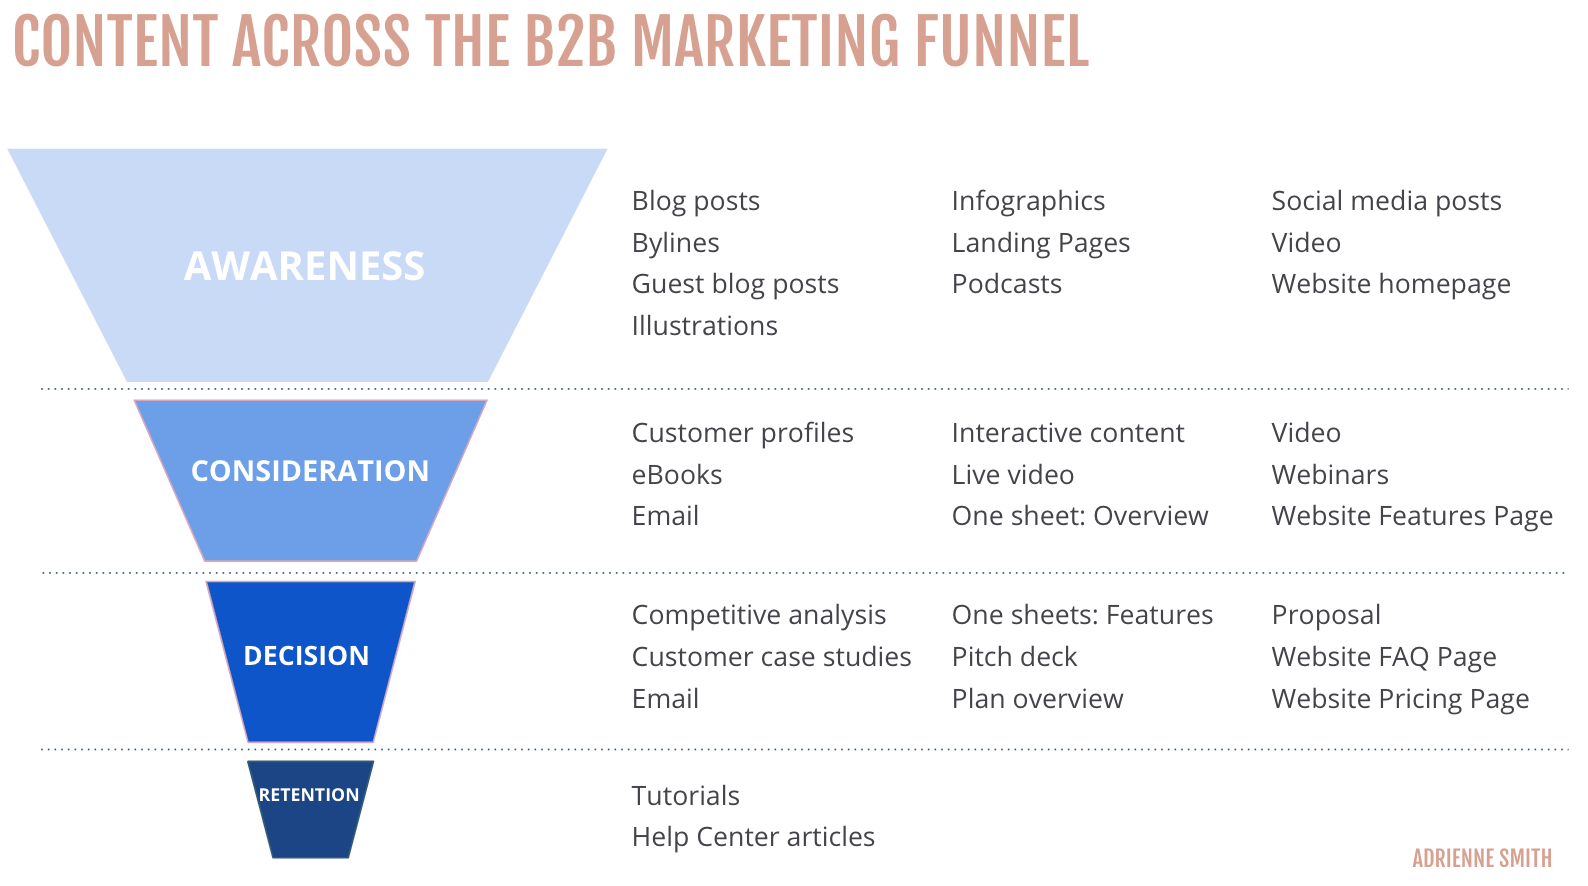 Content For Each B2B Marketing Funnel Stage